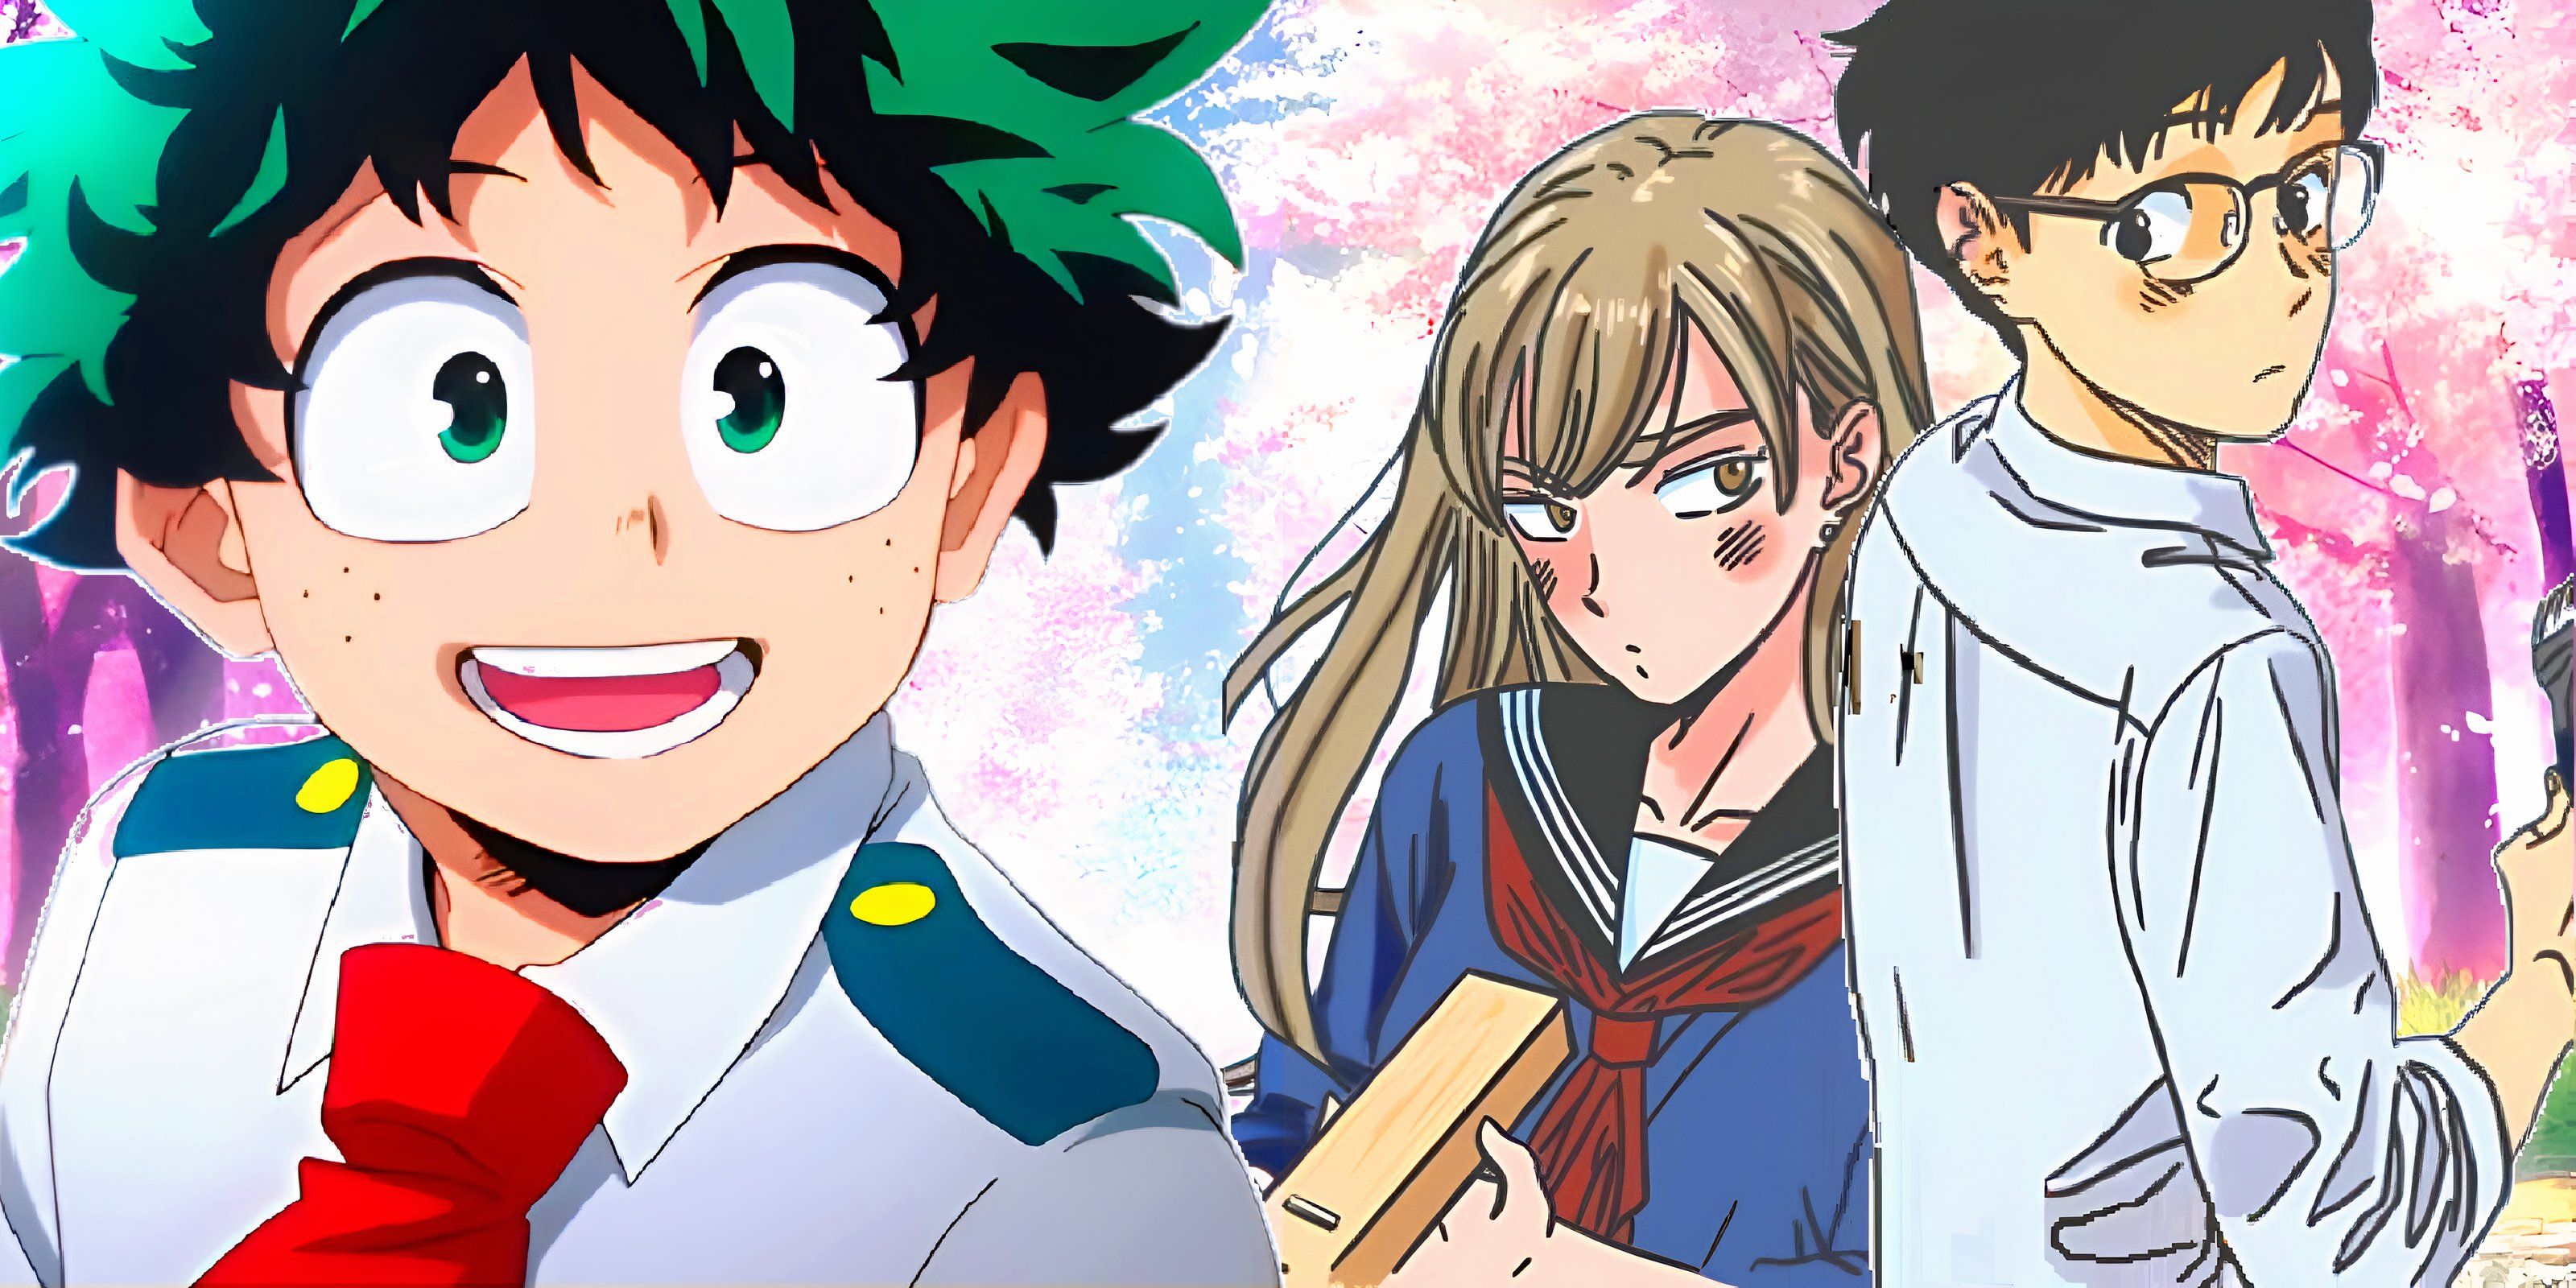 A collage-style image featuring official artwork of Deku from MHA and the leads from Blooming Love